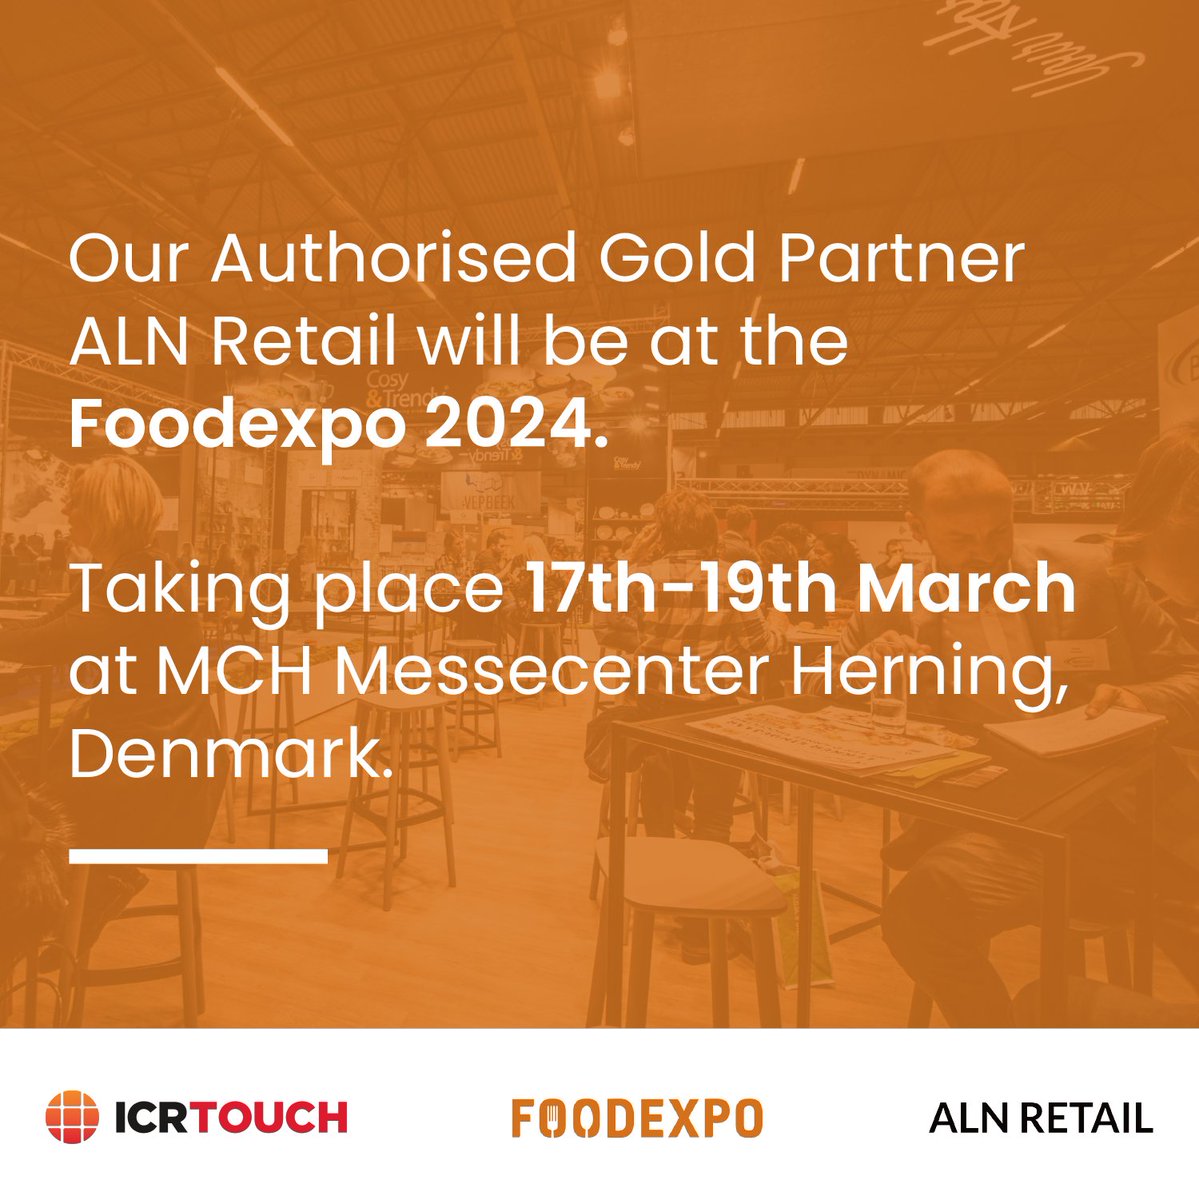 Good luck to our Authorised Gold Partner, ALN Retail exhibiting at the Foodexpo later this month in Denmark! 🤞🇩🇰

#weareICRTouch #EPoS #FoodExpo2024